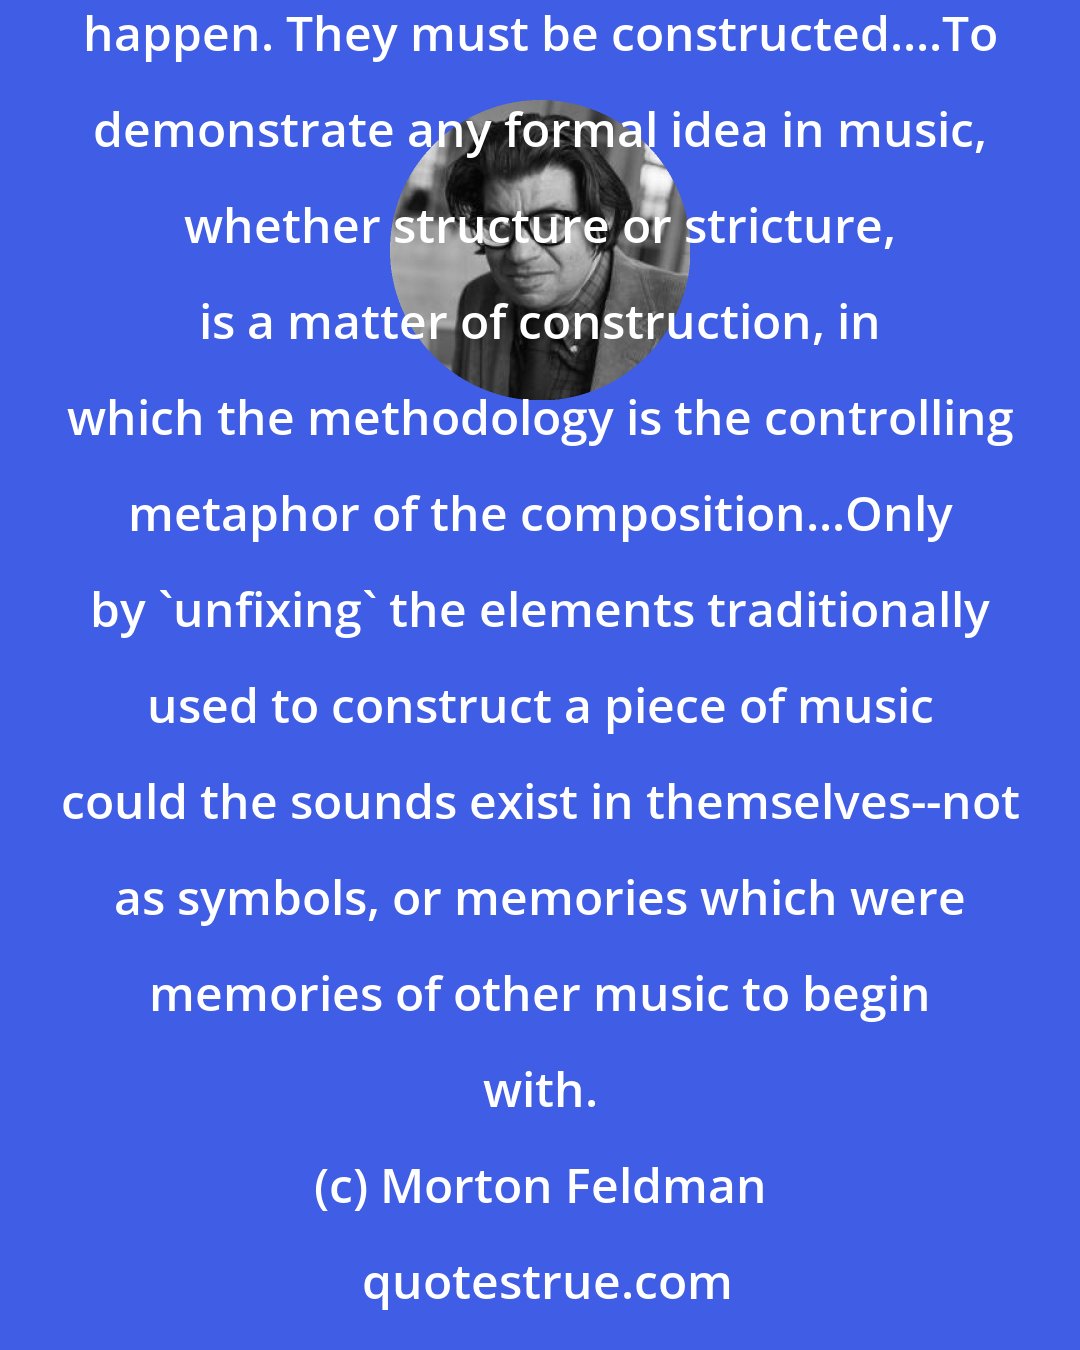 Morton Feldman: It appears to me that the subject of music, from Machaut to Boulez, has always been its construction. Melodies of 12-tone rows just don't happen. They must be constructed....To demonstrate any formal idea in music, whether structure or stricture, is a matter of construction, in which the methodology is the controlling metaphor of the composition...Only by 'unfixing' the elements traditionally used to construct a piece of music could the sounds exist in themselves--not as symbols, or memories which were memories of other music to begin with.